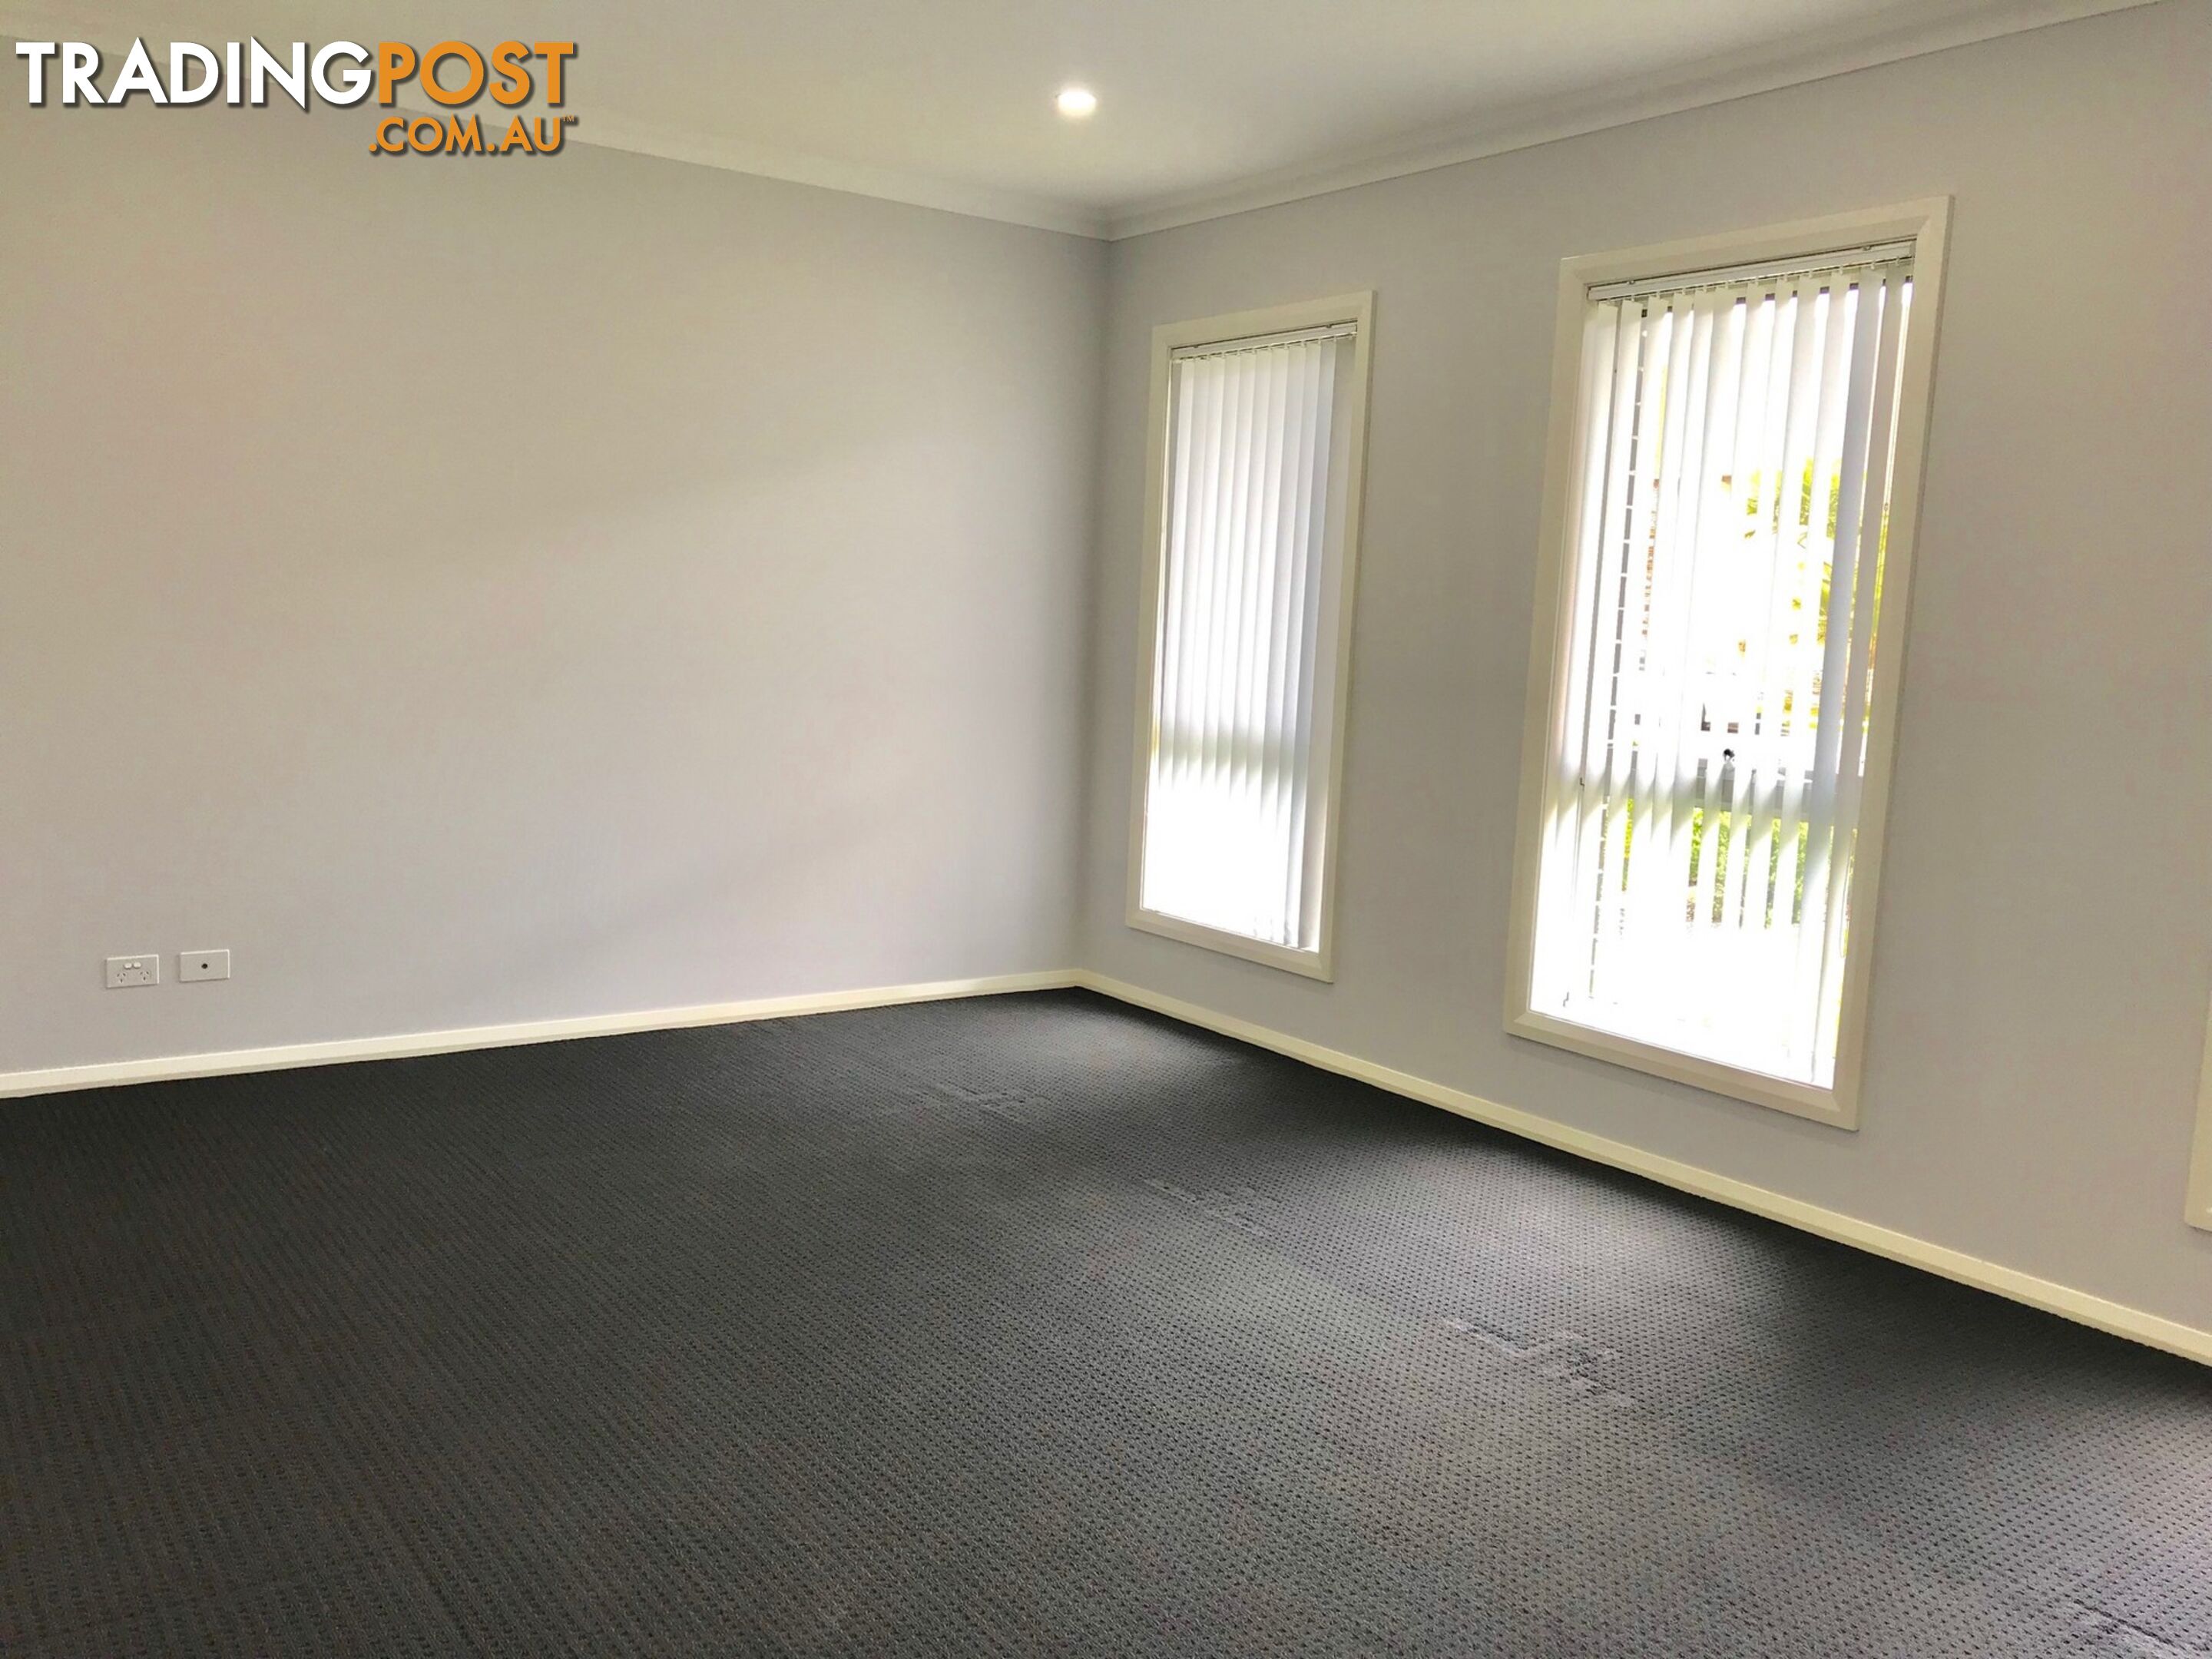 7 Clearfield St COLEBEE NSW 2761